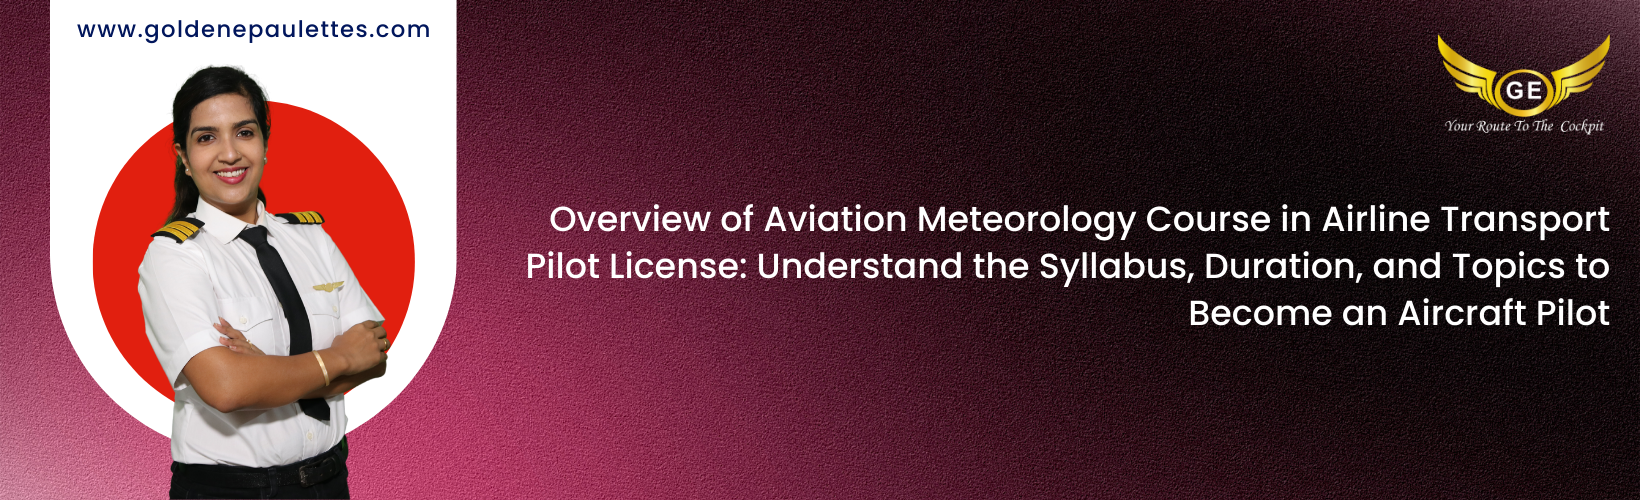 Exam Syllabus for Aviation Meteorology Course in Airline Transport Pilot License